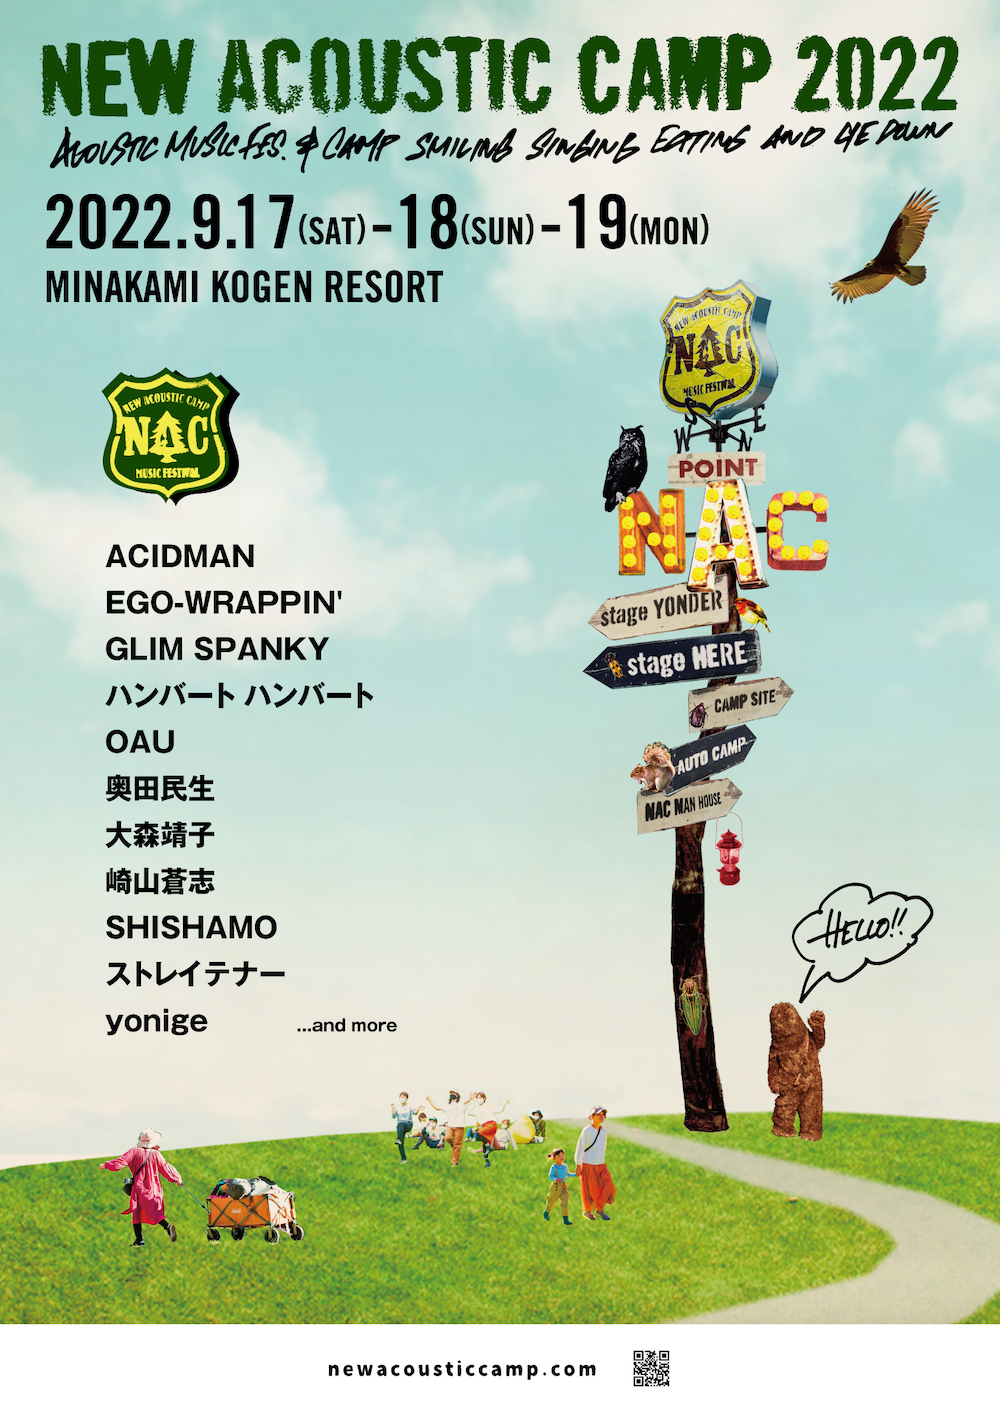 New Acoustic Camp 2022』全チケット情報と会場マップ解禁 | SPICE ...